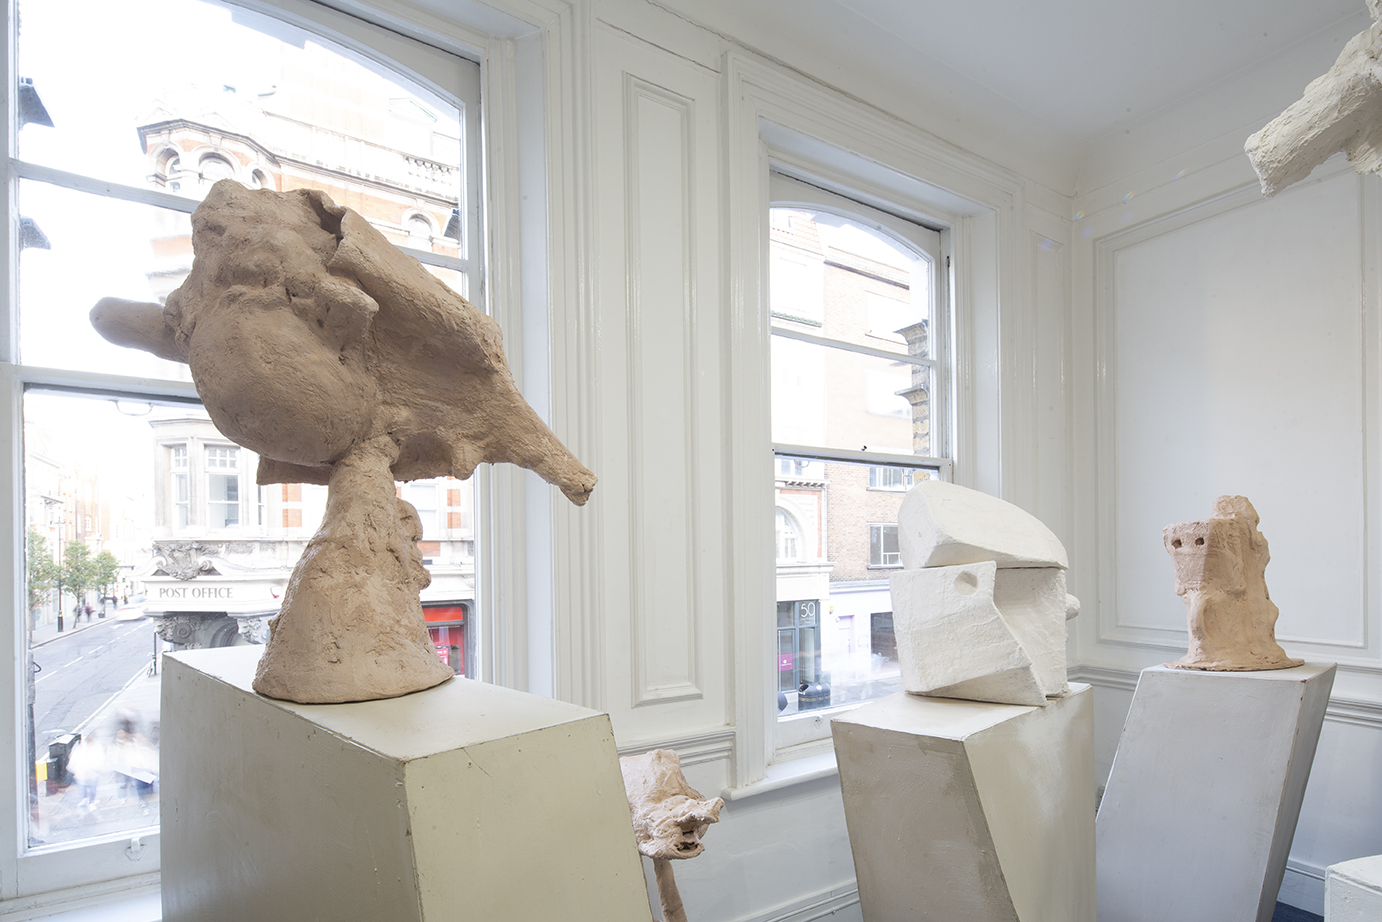 Jack Killick Exhibition View at Lungley Gallery, London. 2022